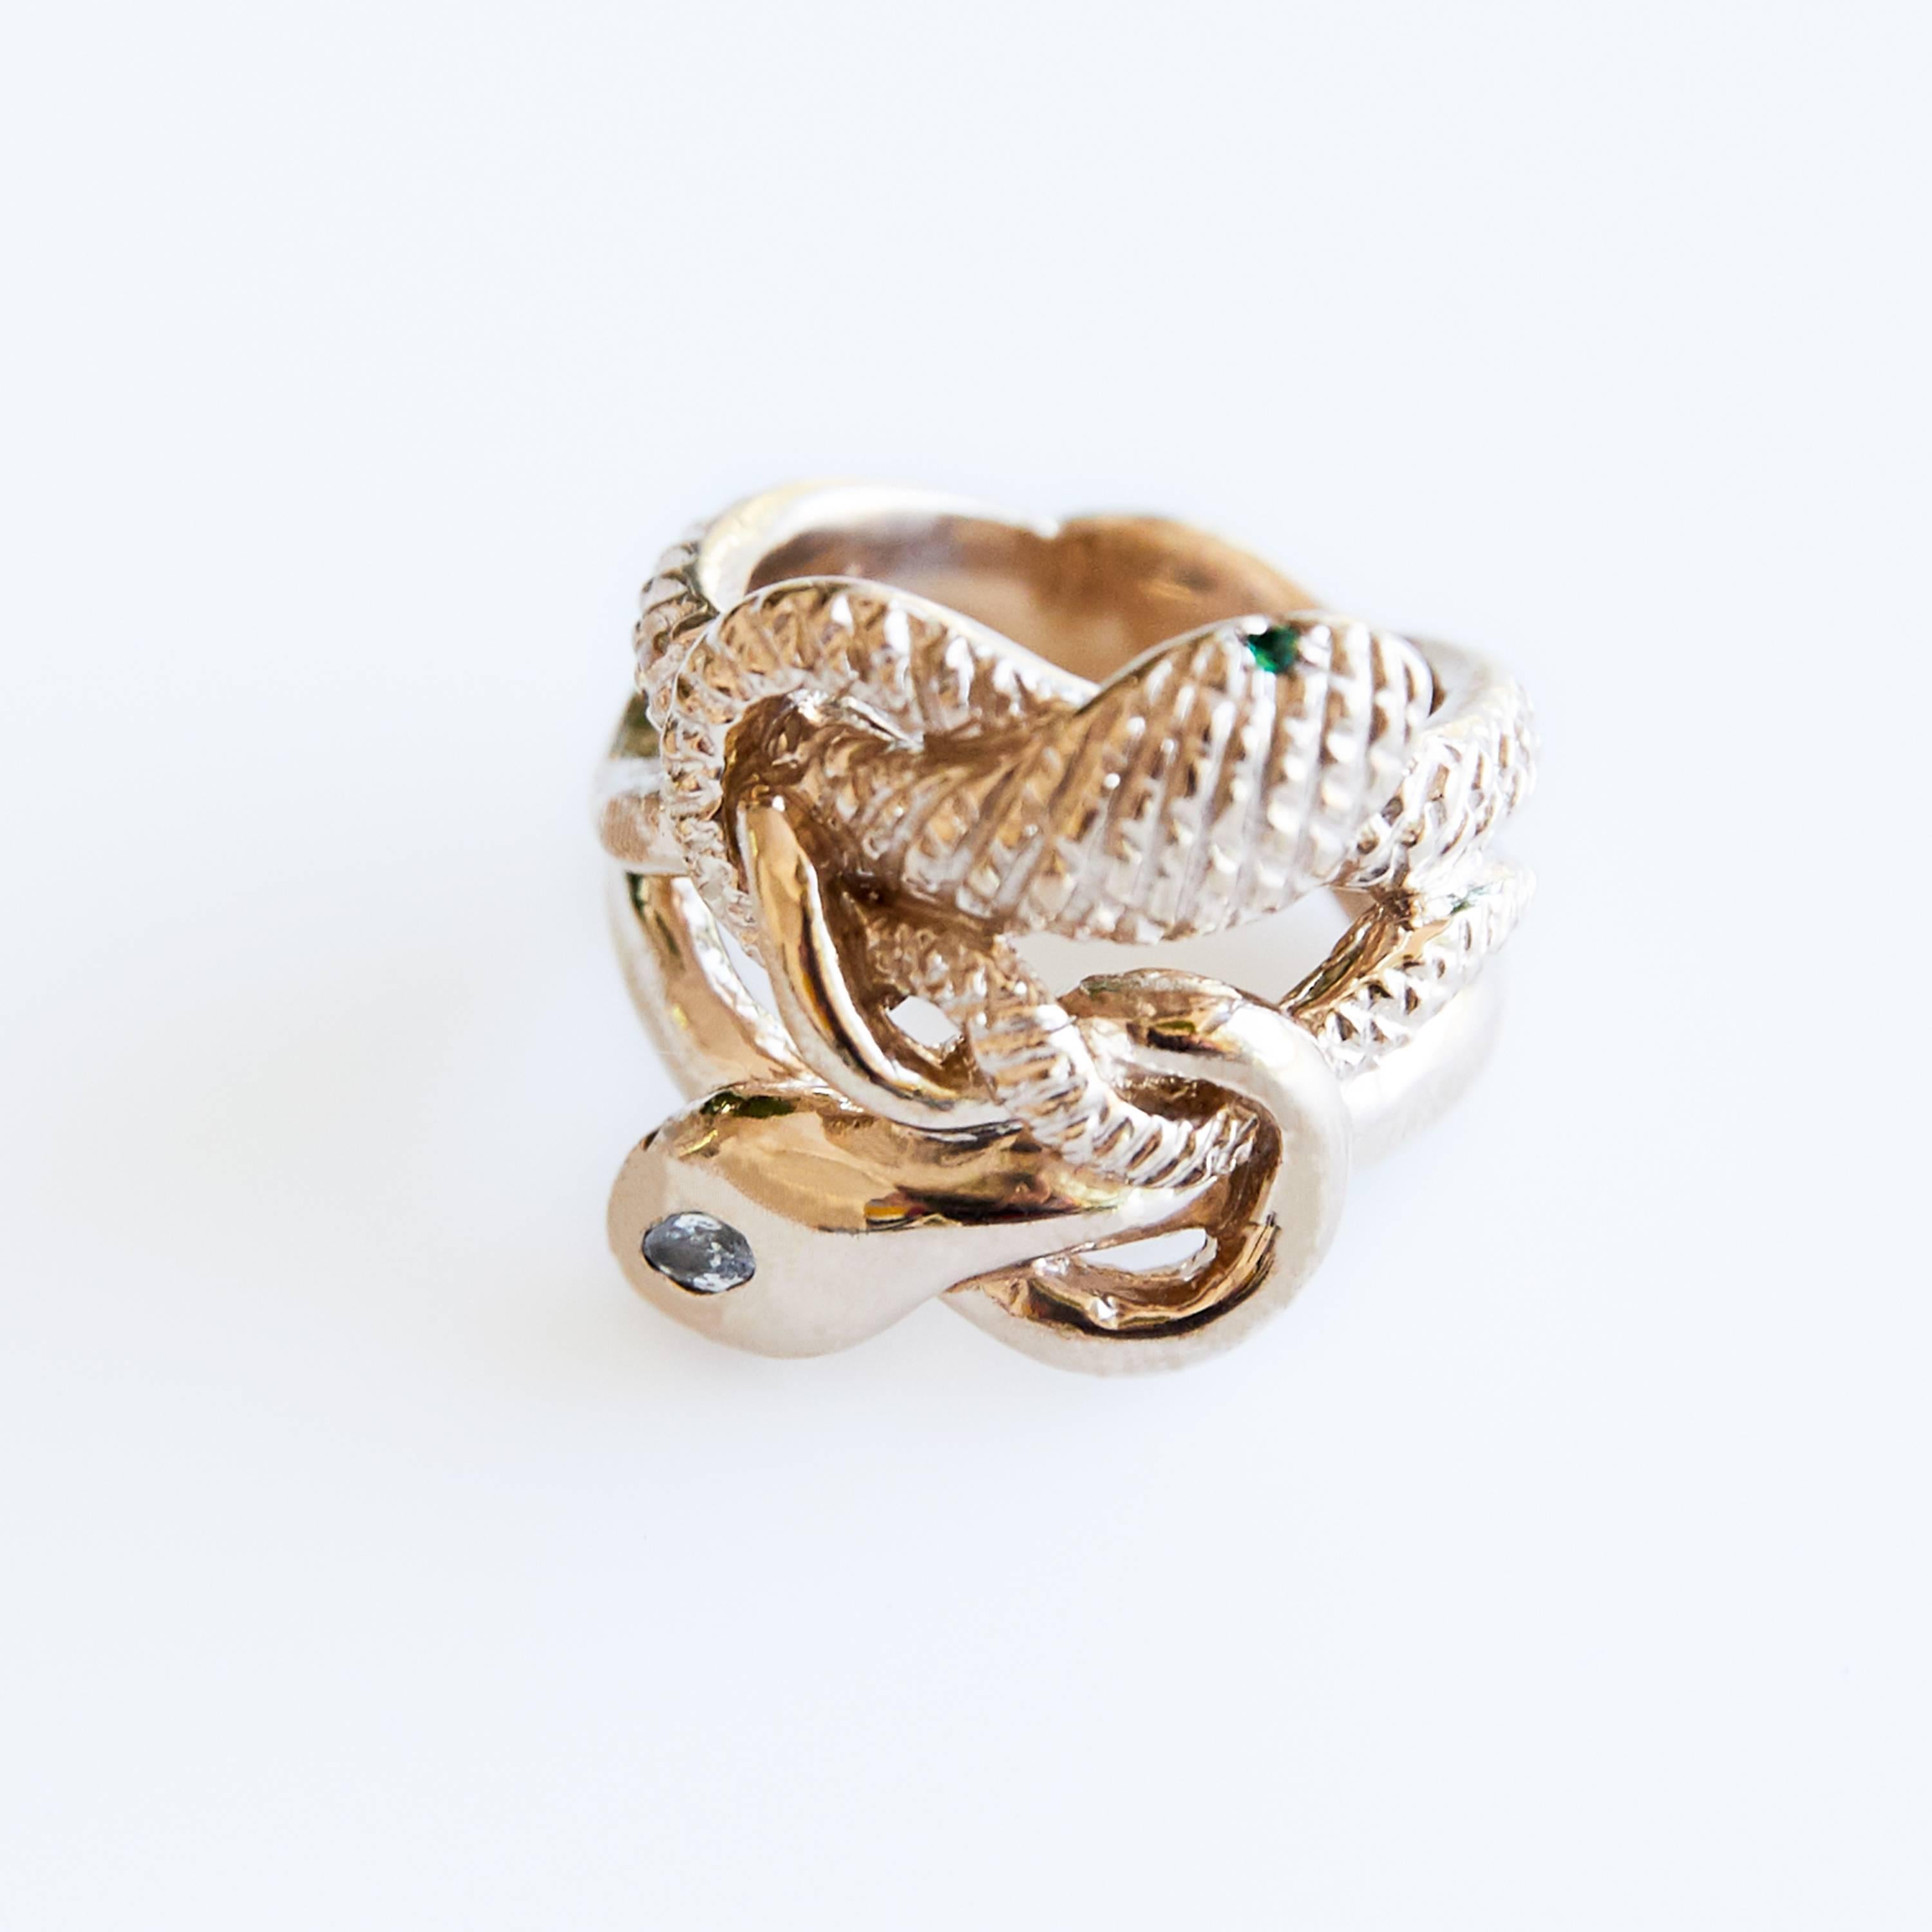 Brilliant Cut Sapphire Marquis Emerald Ruby Double Head Snake Ring Victorian Style J Dauphin For Sale